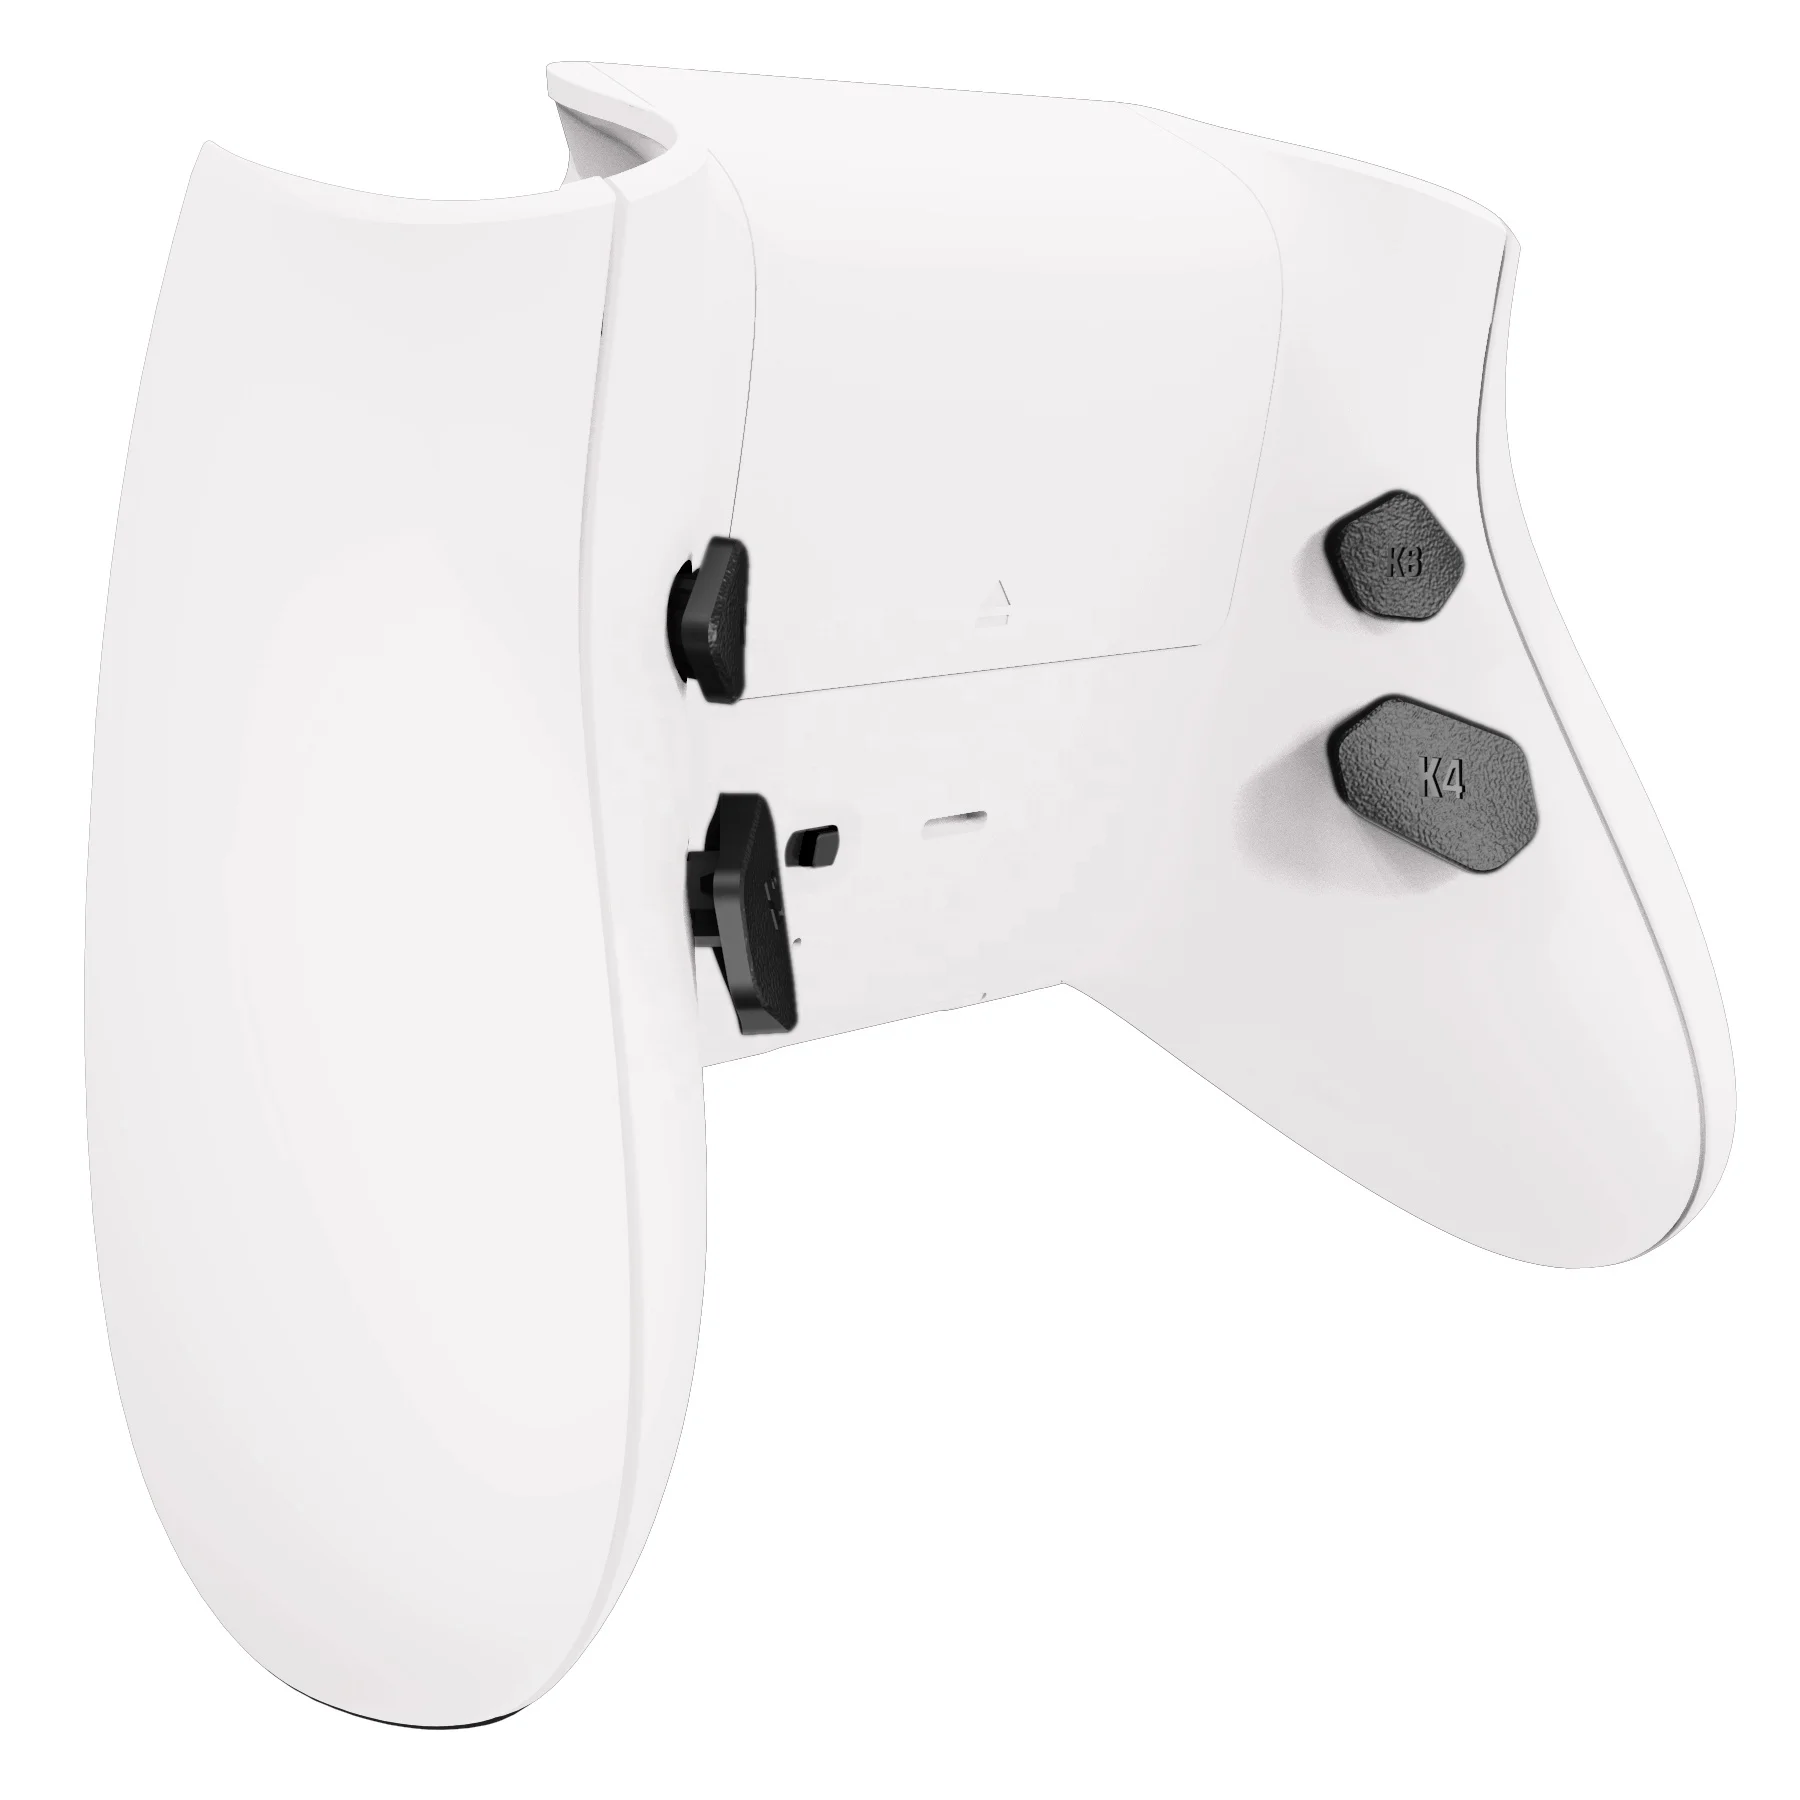 XBOX ONE S X Modded Controller - XMOD 30 PLUS Remap Mode, White